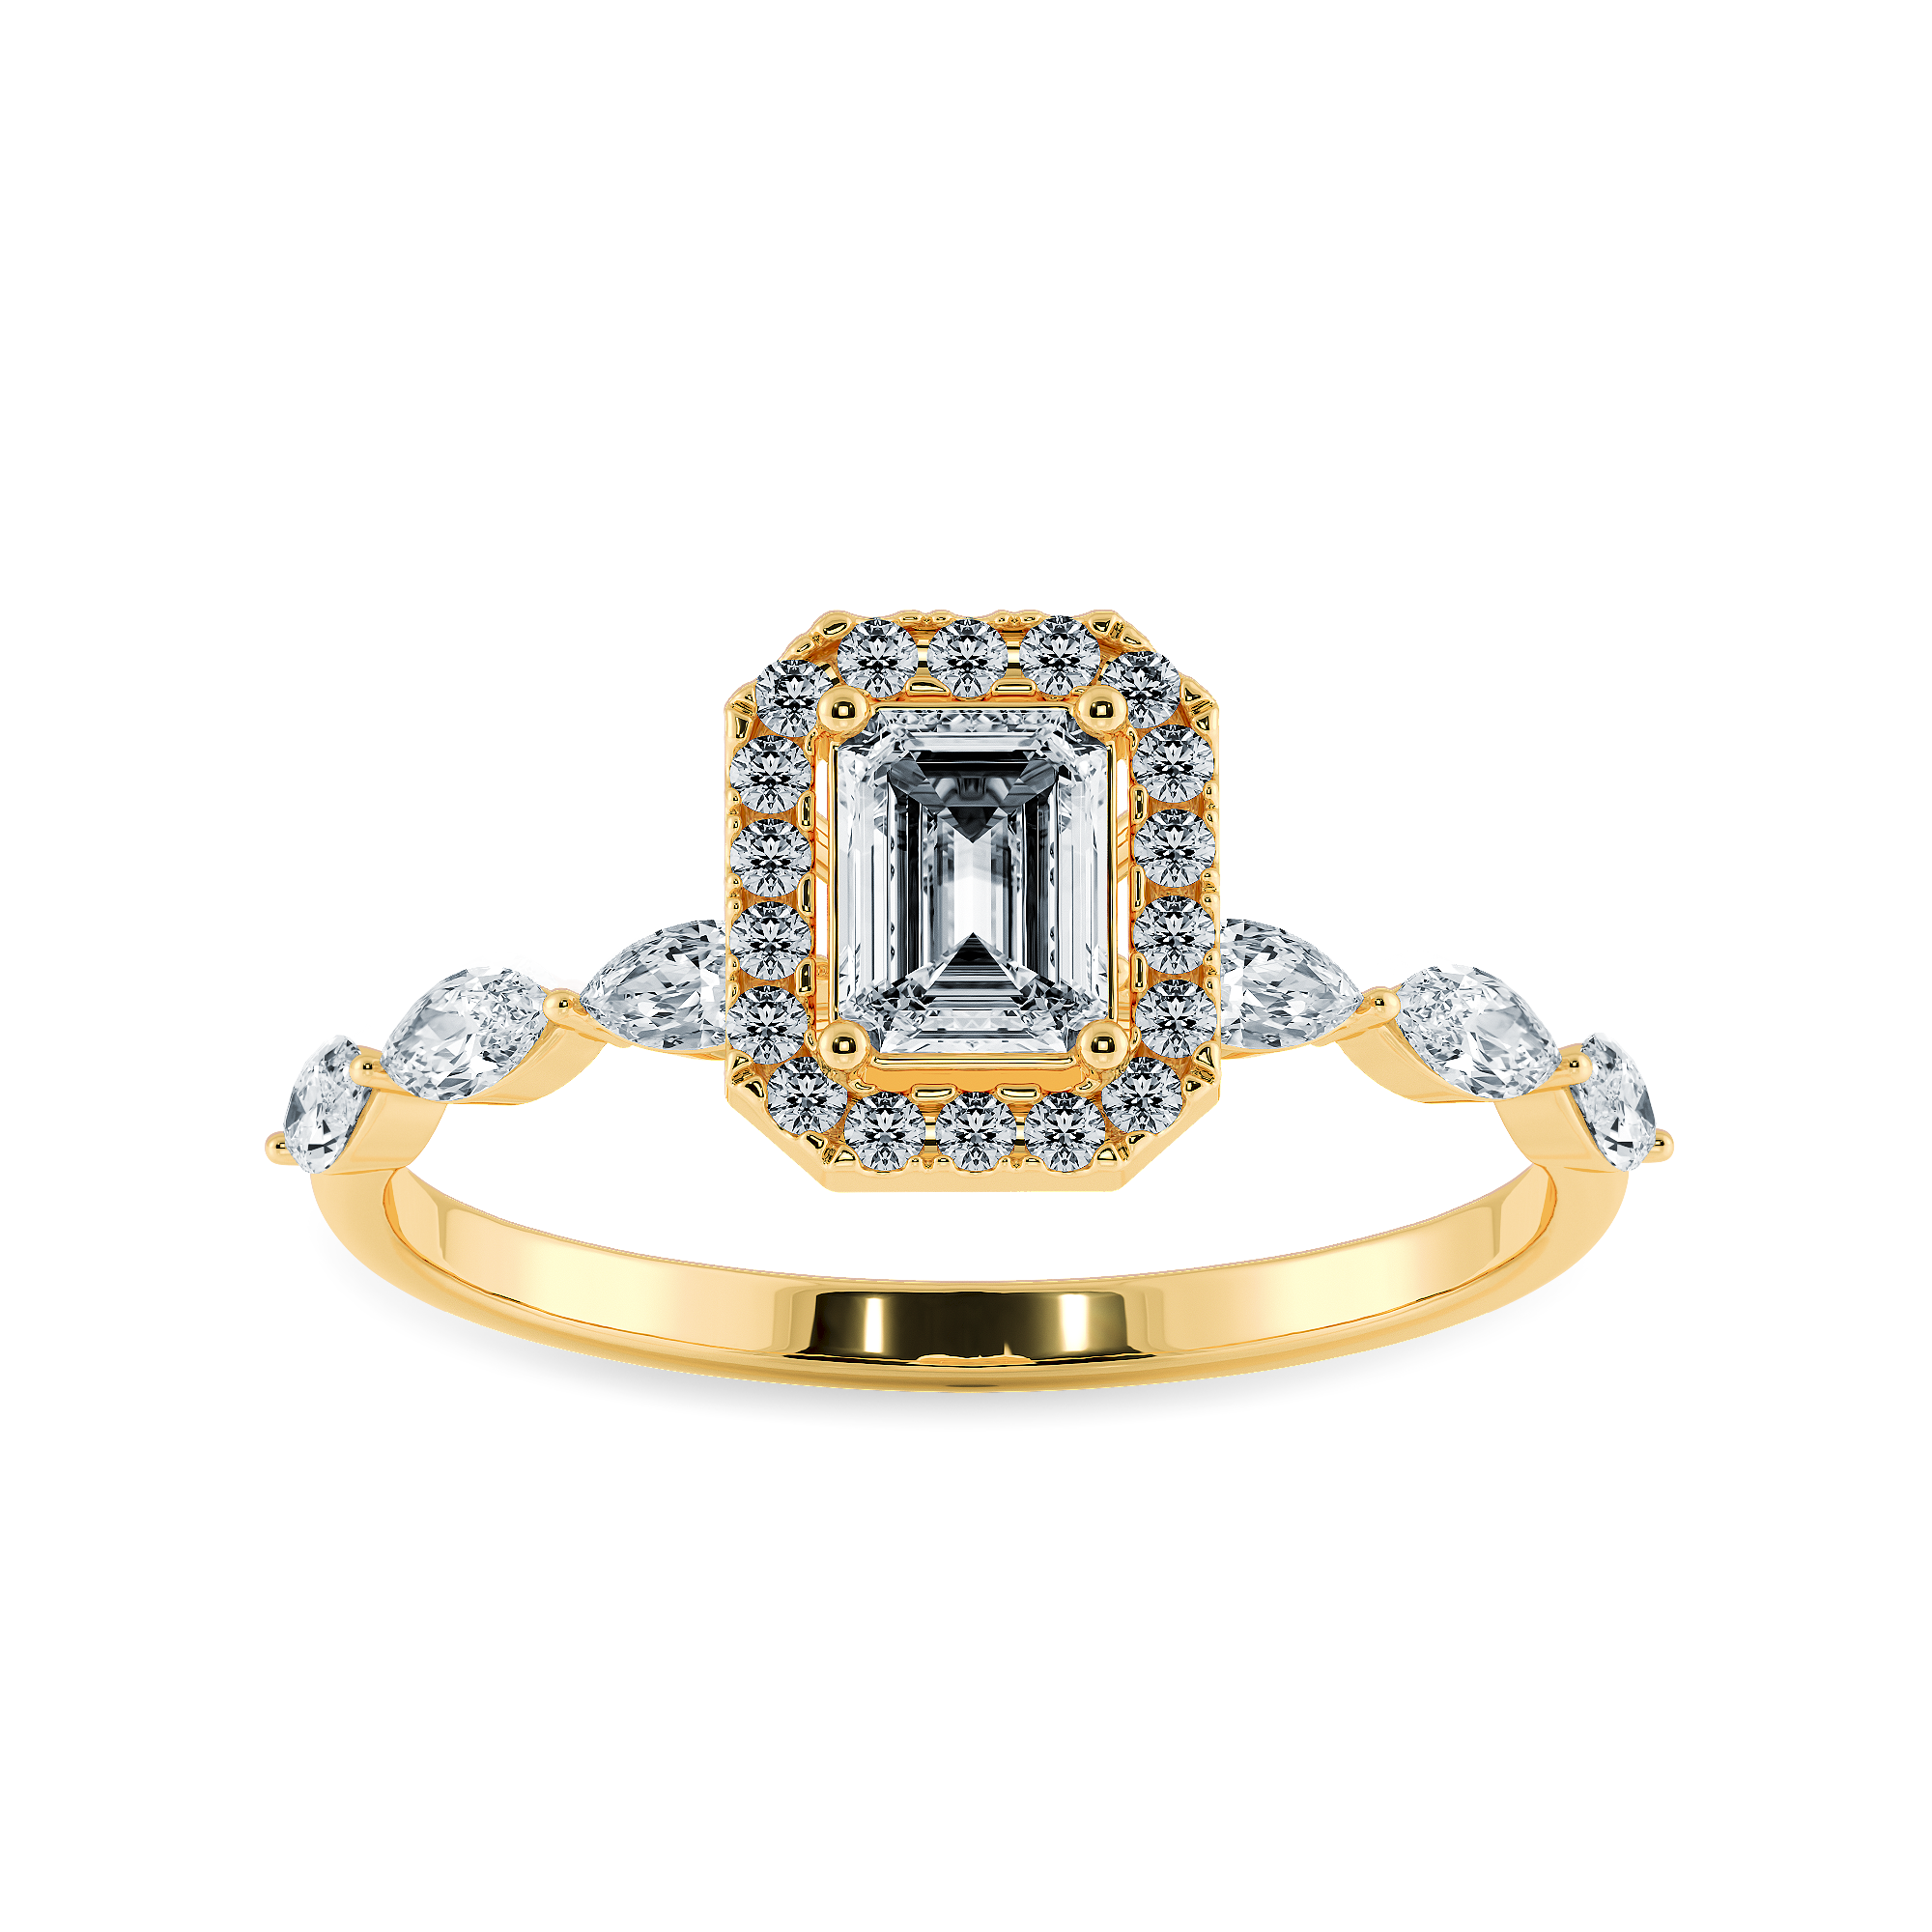 70-Pointer Emerald Cut Solitaire Halo Diamonds with Marquise Cut Diamonds Accents 18K Yellow Gold Ring JL AU 1272Y-B